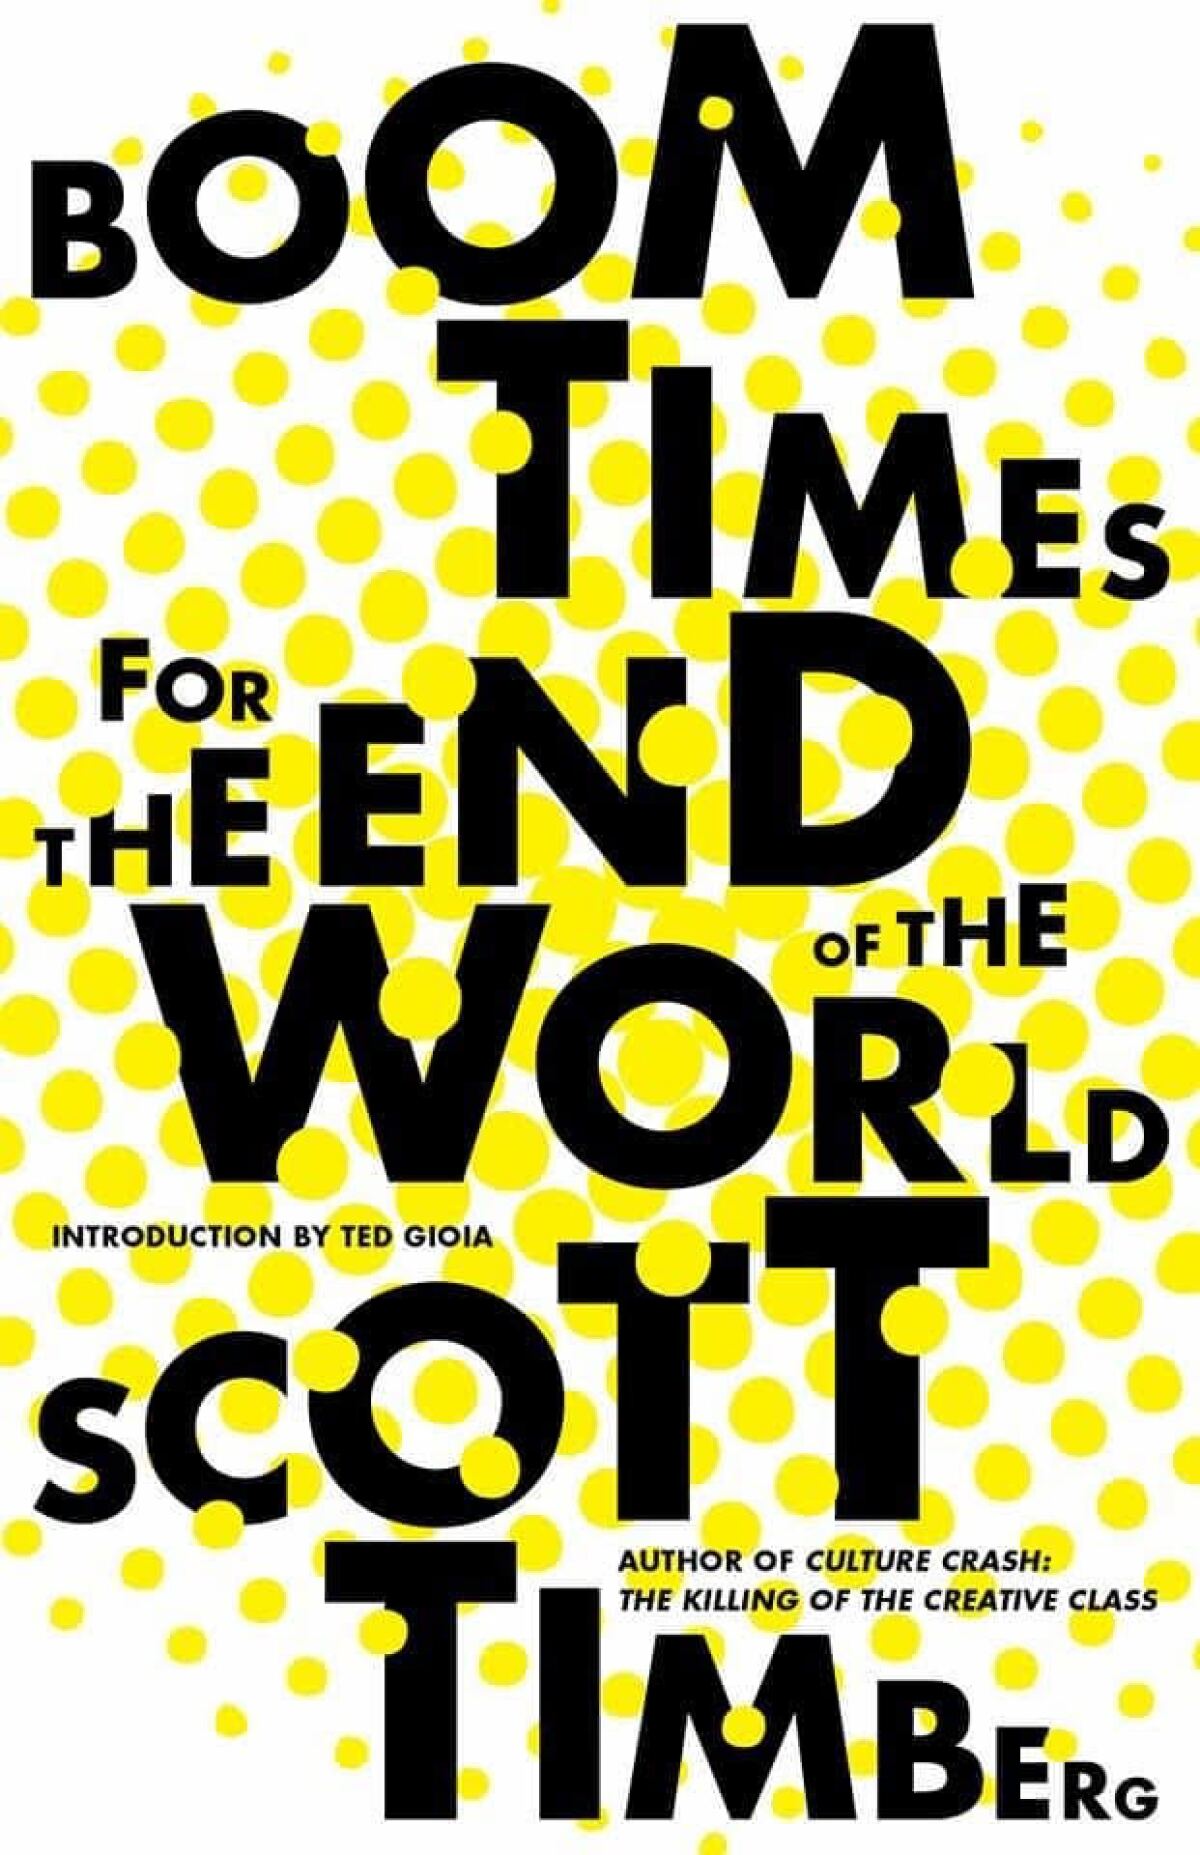 'Boom Times for the End of the World,' by Scott Timberg